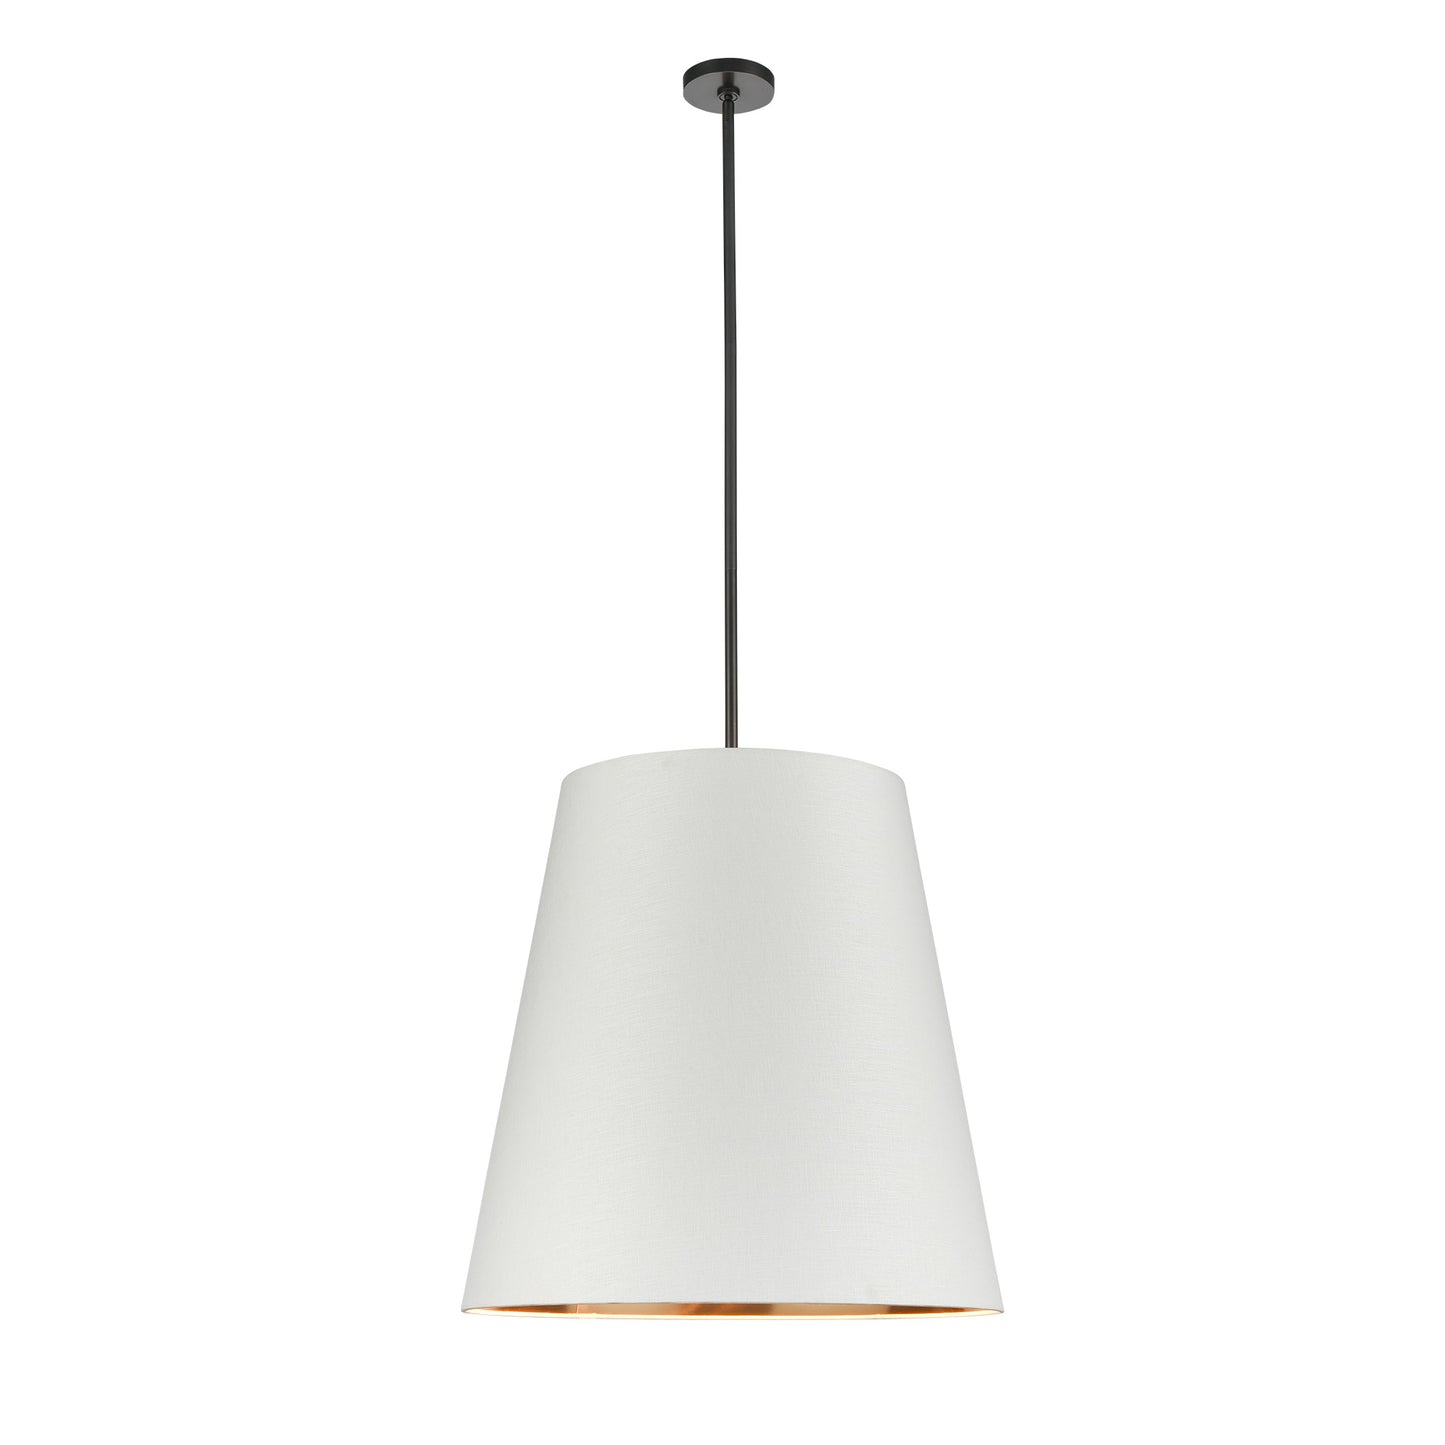 PD311025UBWG Calor 3 Light 25-1/2" Urban Bronze With White Linen And Gold Parchment Shade Pendant